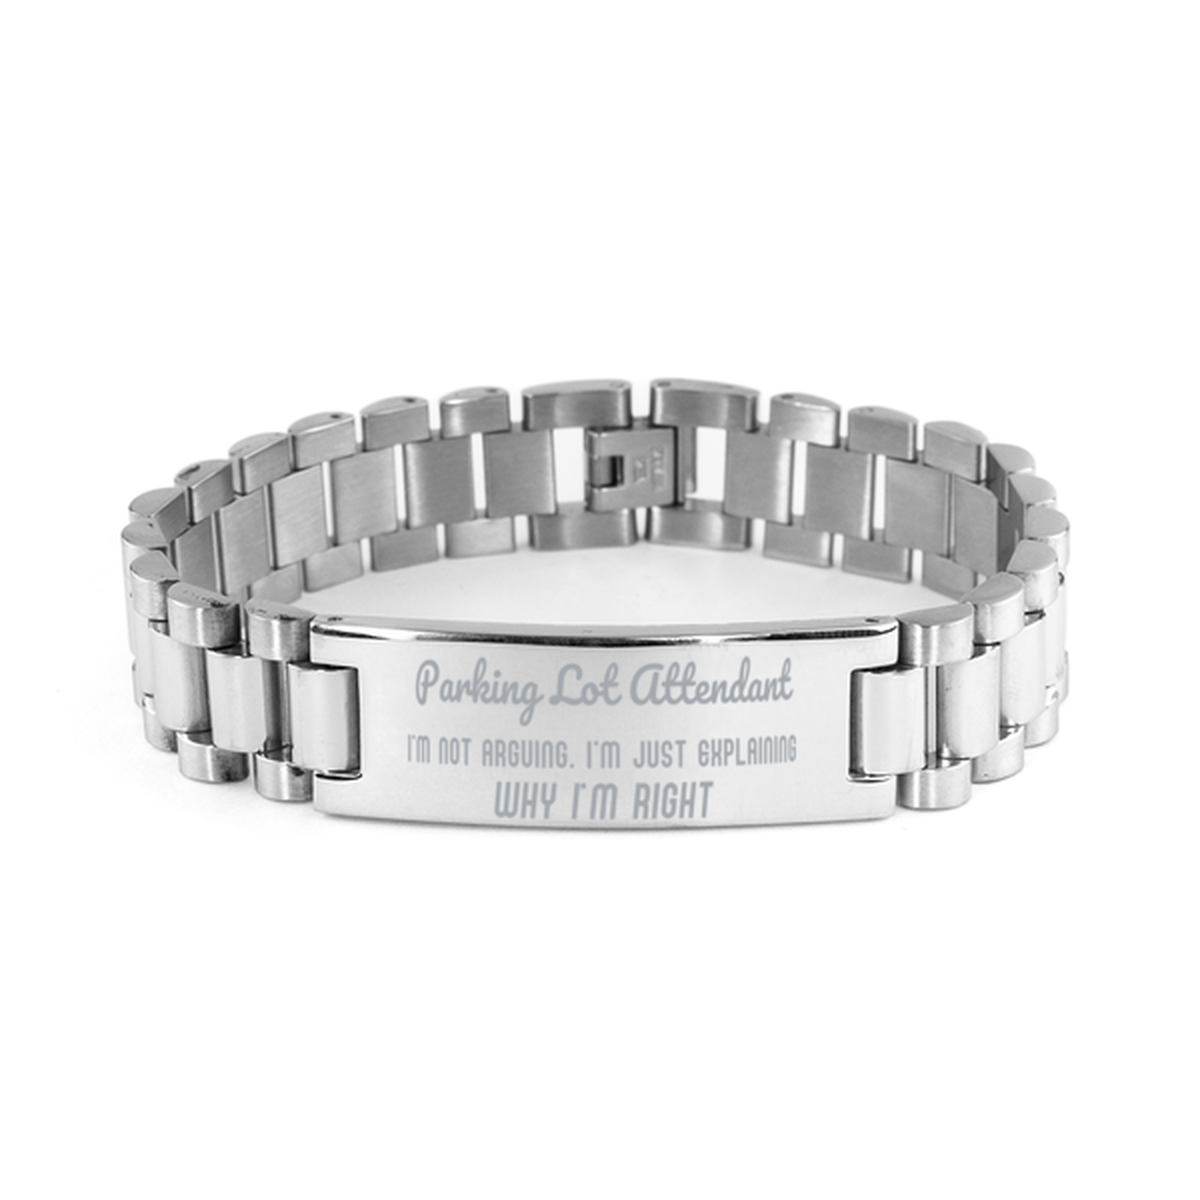 Parking Lot Attendant I'm not Arguing. I'm Just Explaining Why I'm RIGHT Ladder Stainless Steel Bracelet, Graduation Birthday Christmas Parking Lot Attendant Gifts For Parking Lot Attendant Funny Saying Quote Present for Men Women Coworker